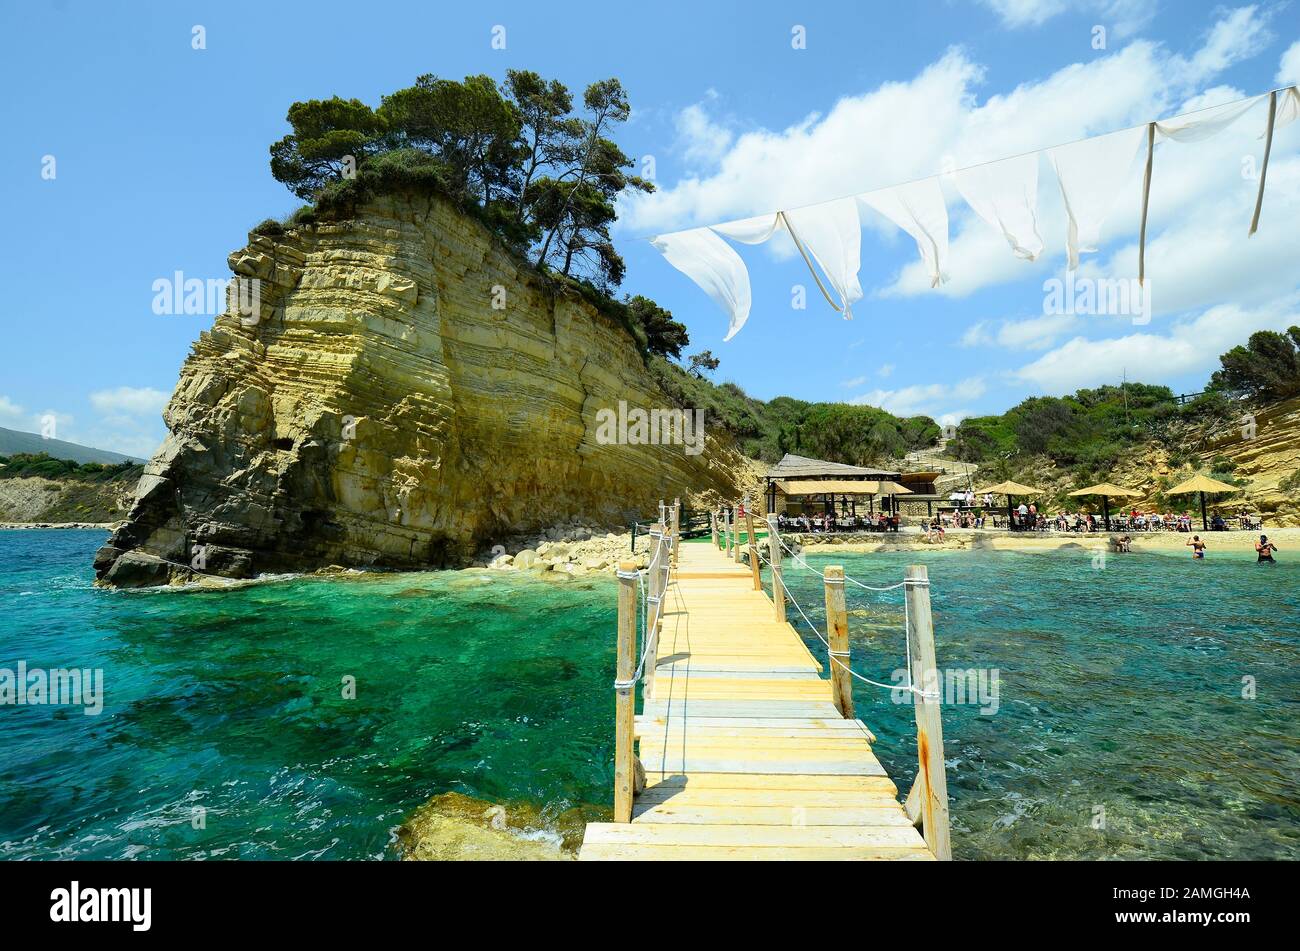 Zakynthos, Greece - May 24th 2016: Unidentified people on beach of tiny Cameo island with bar-restaurant in Ionian sea Stock Photo